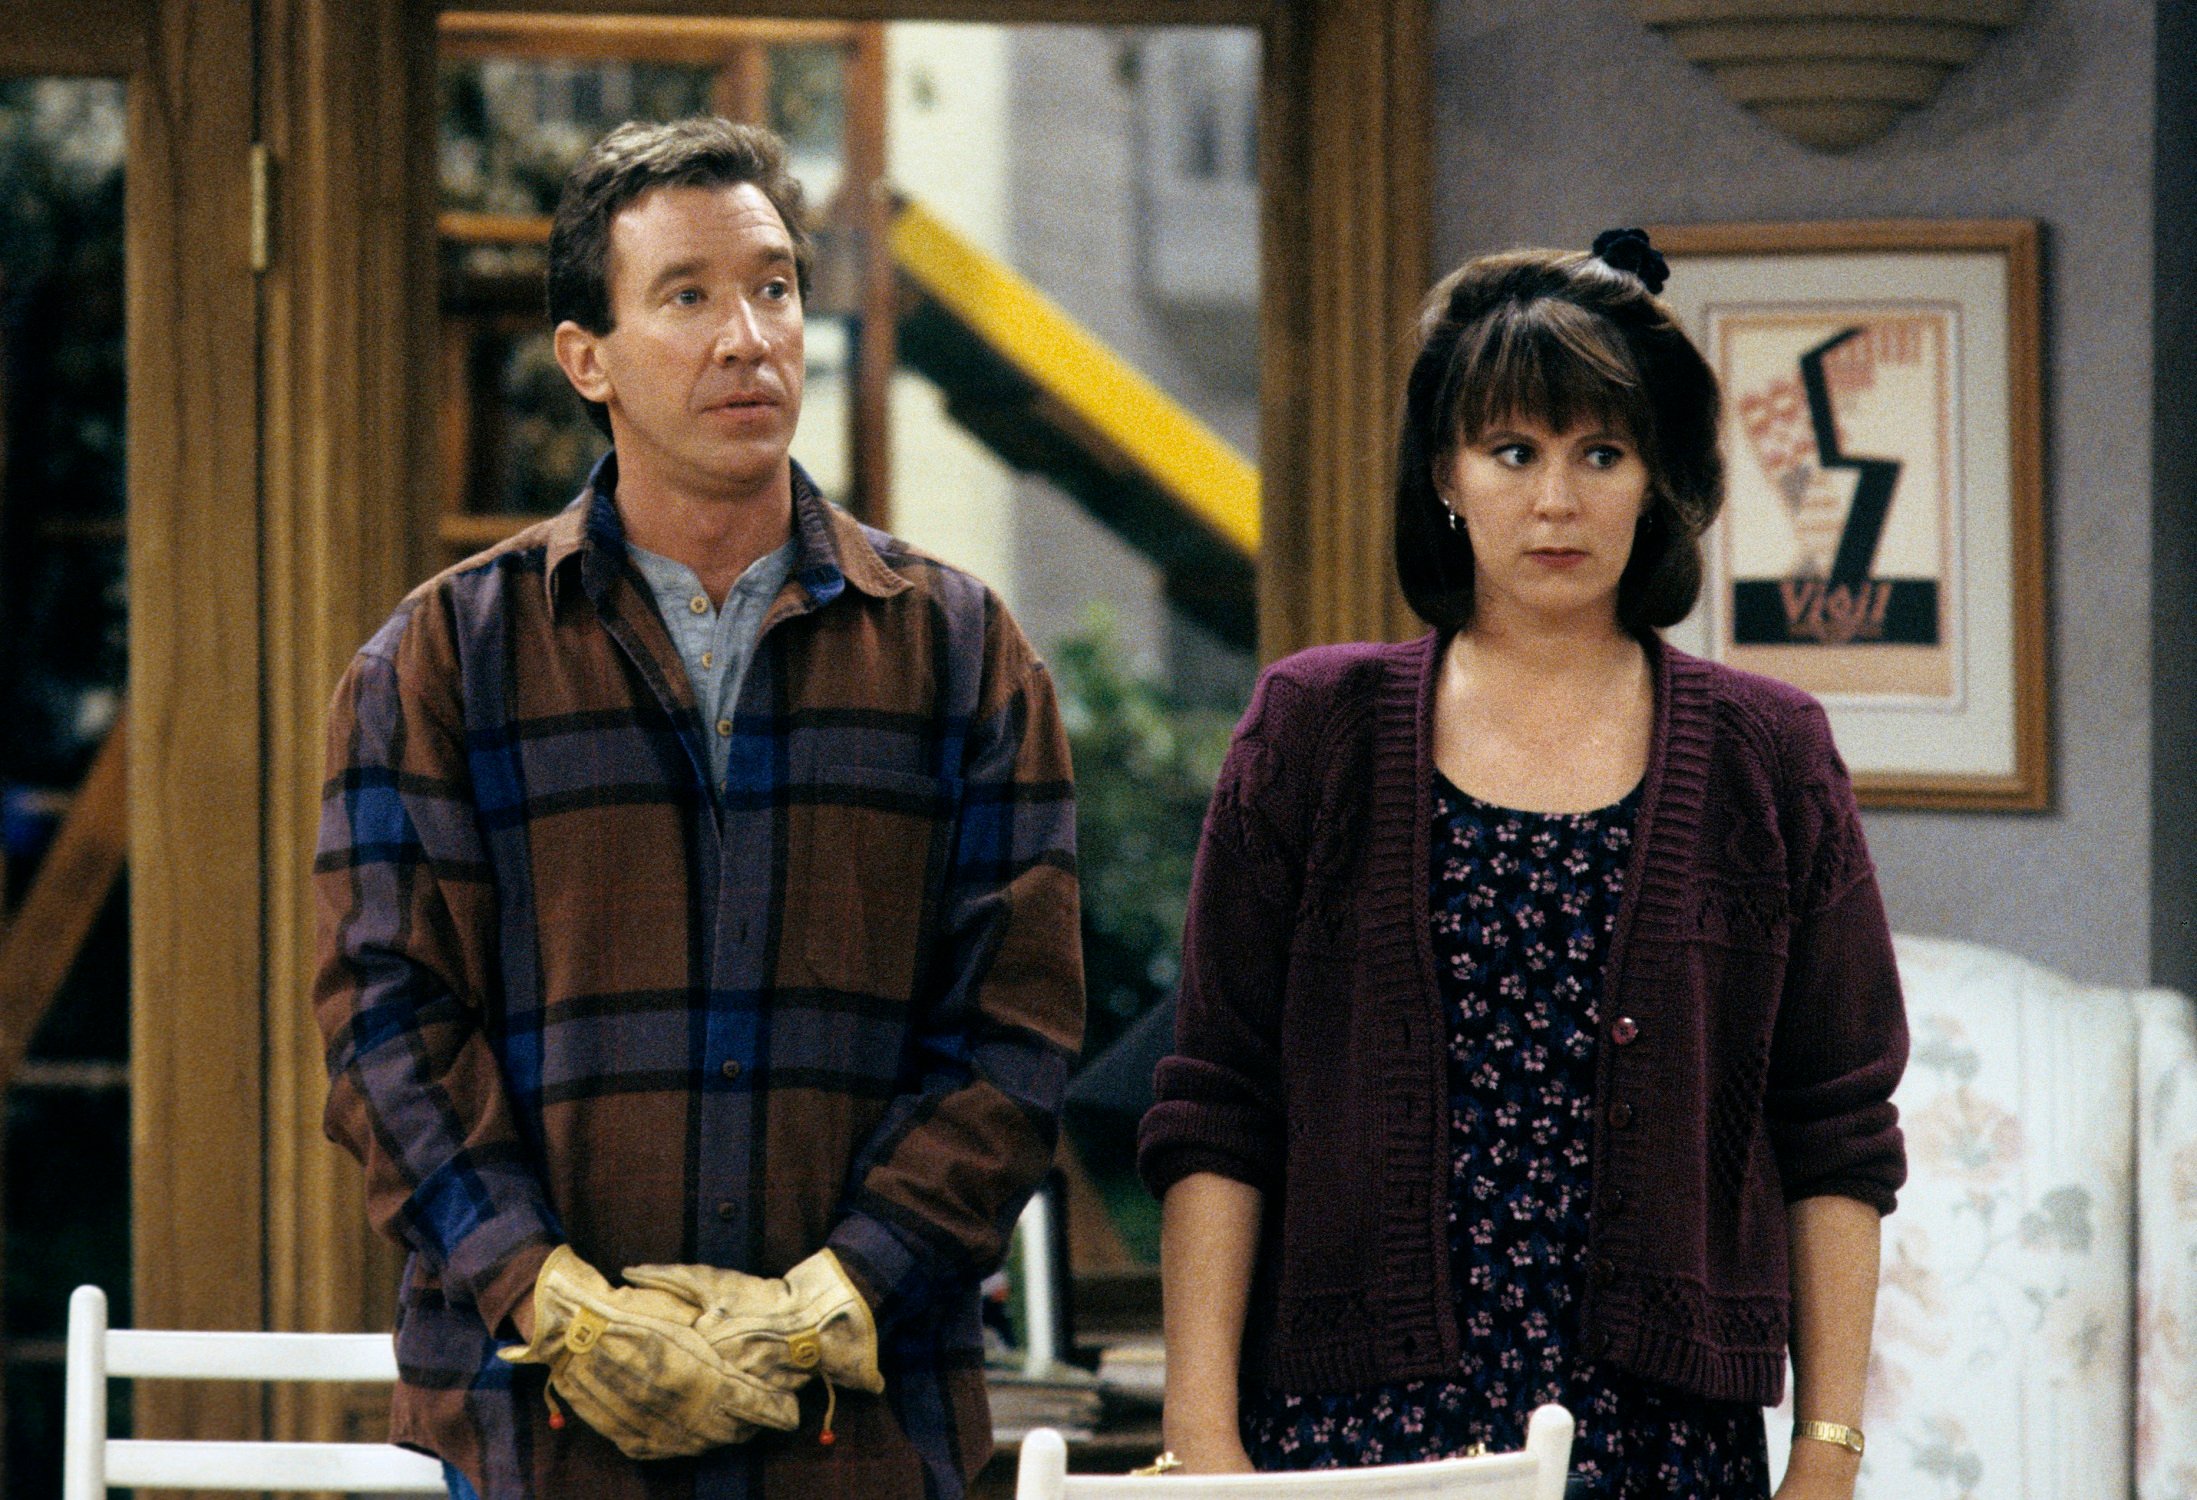 Tim Allen and Patricia Richardson appear in 'Home Improvement'